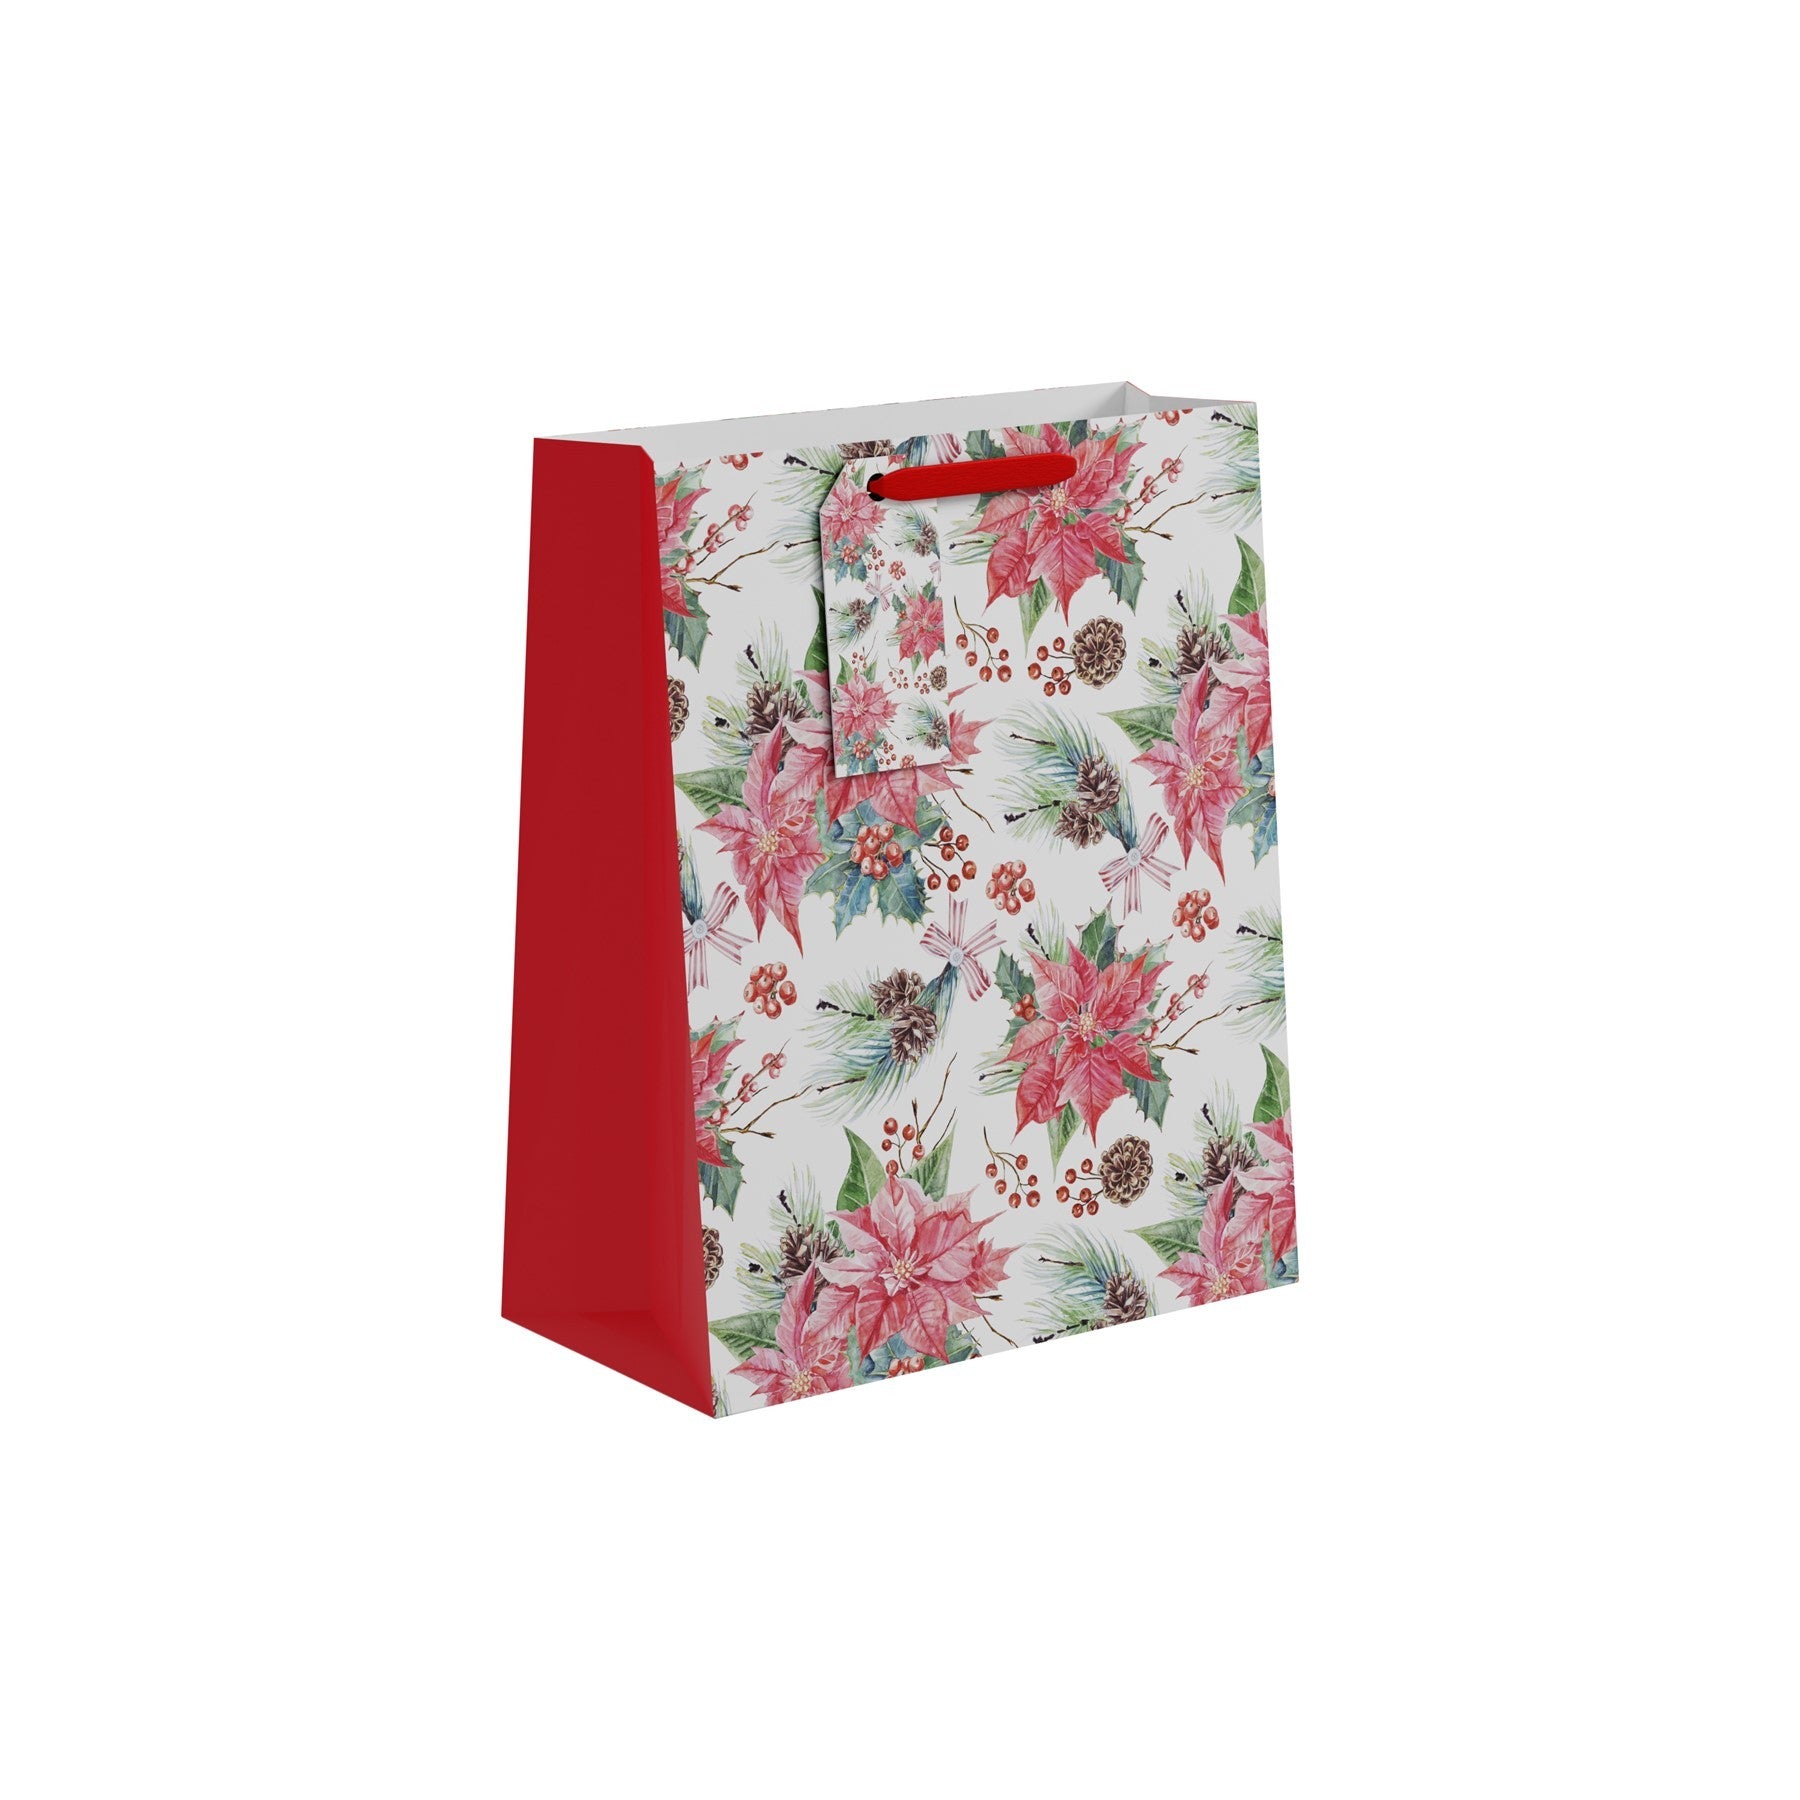 View Christmas Poinsettia Berries Gift Bag Large information